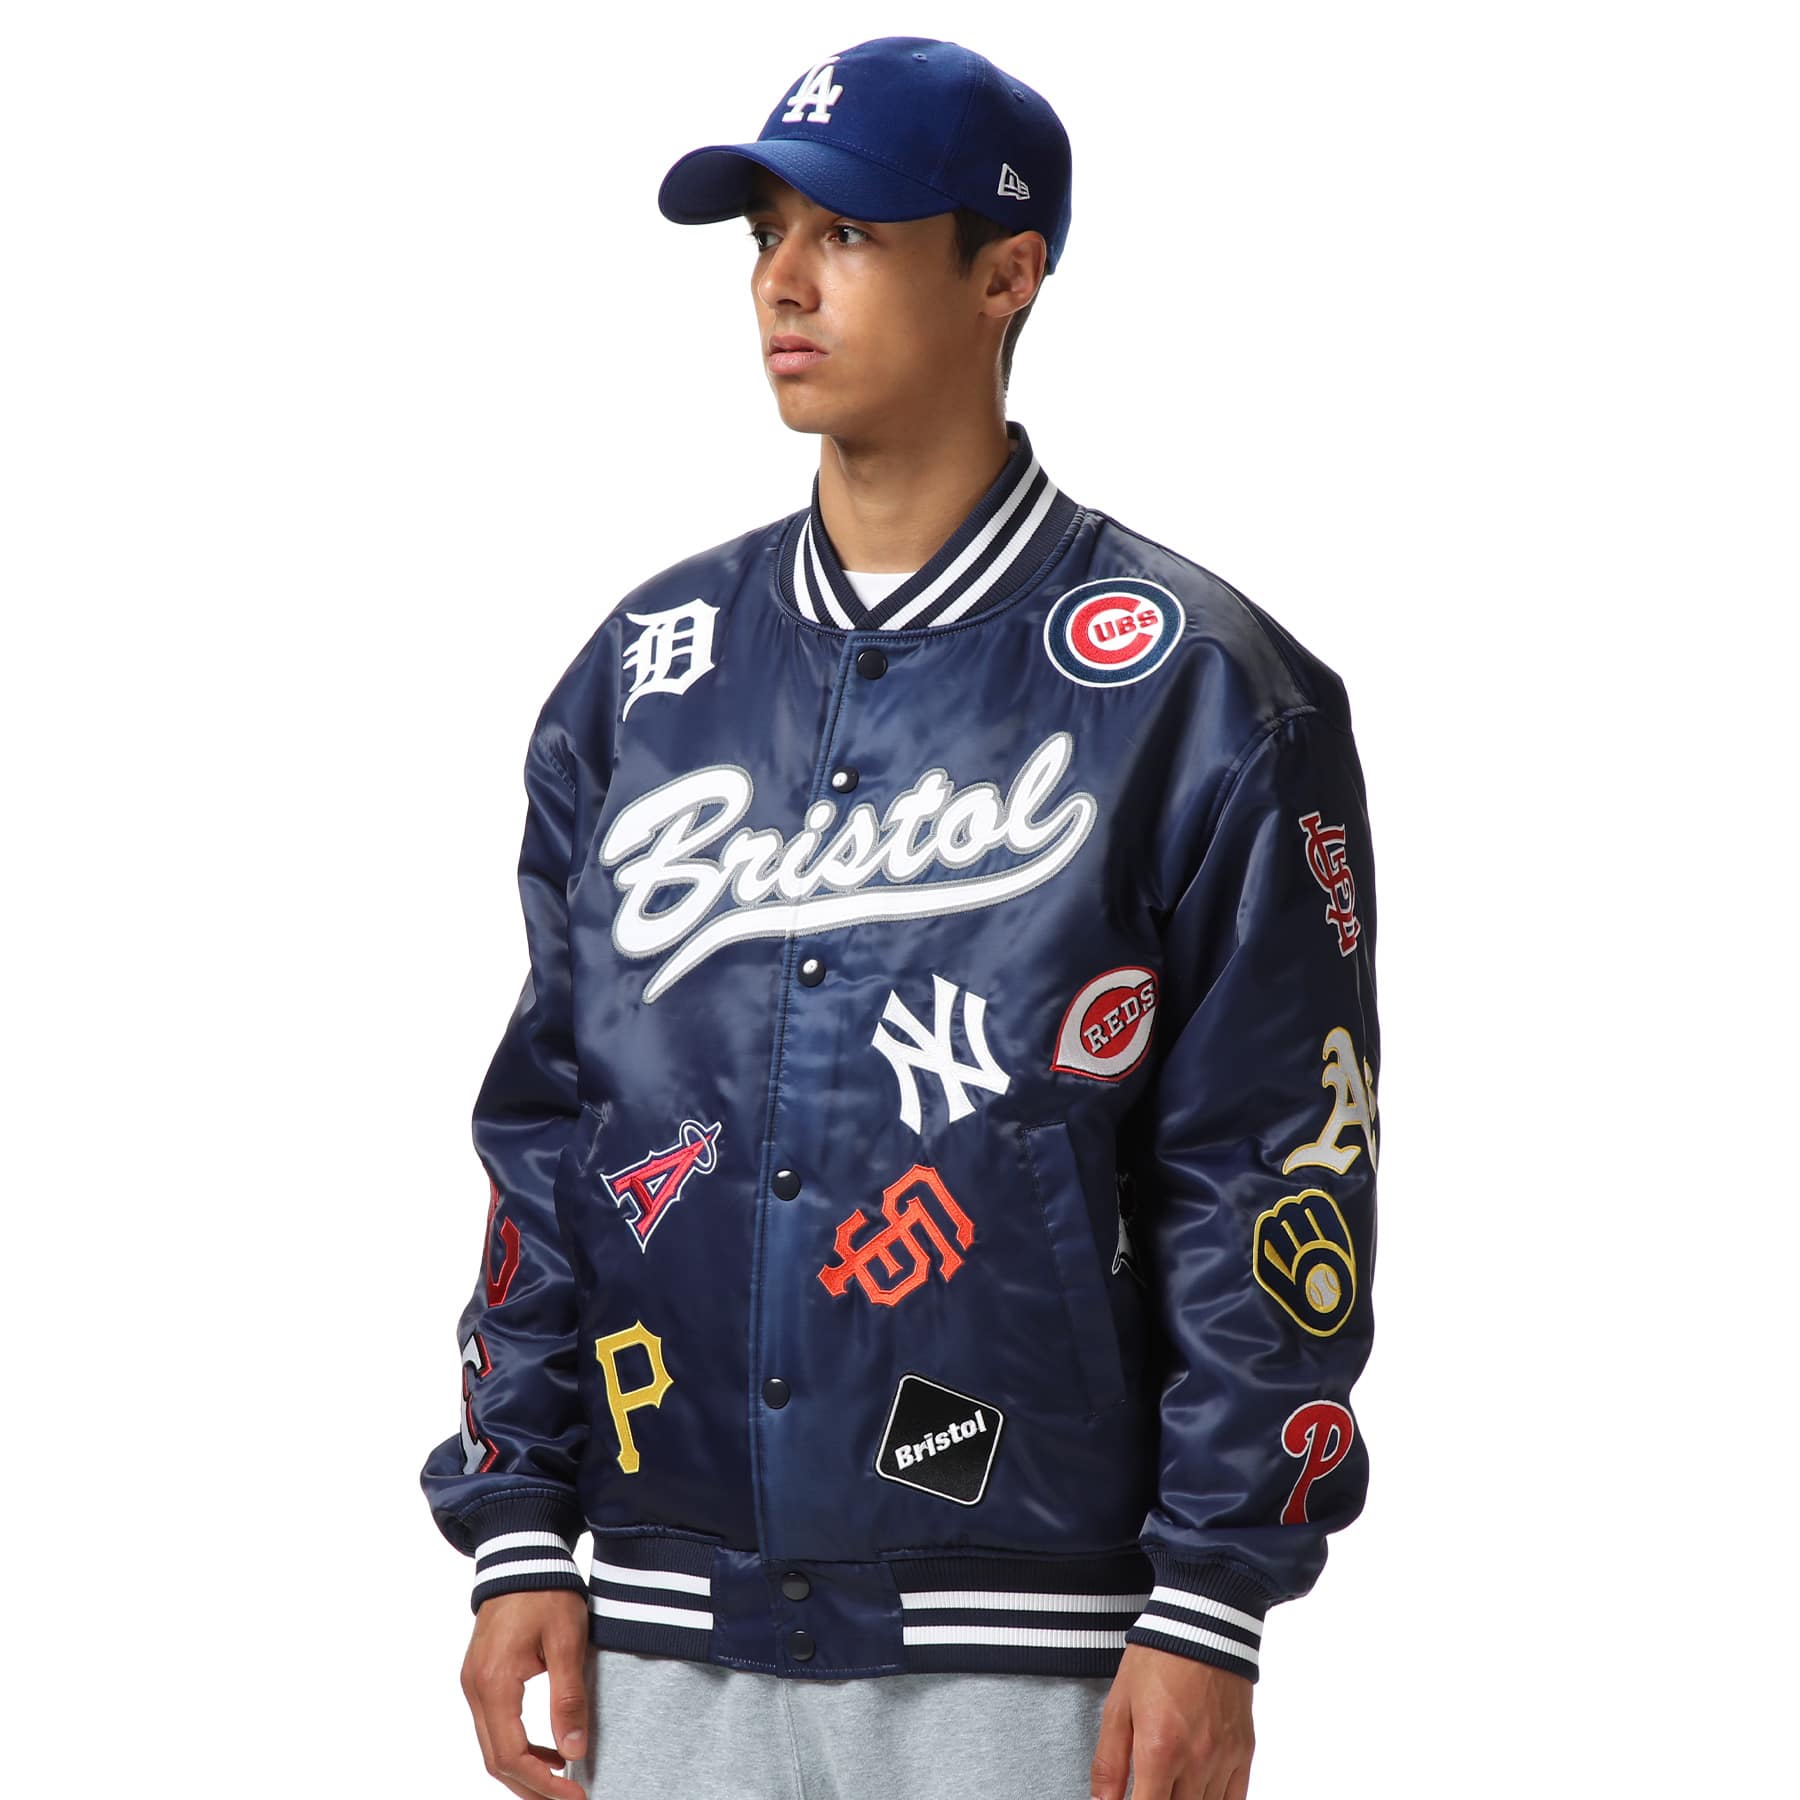 FCRB MLB TOUR ALL TEAM REVERSIBLE JACKET-